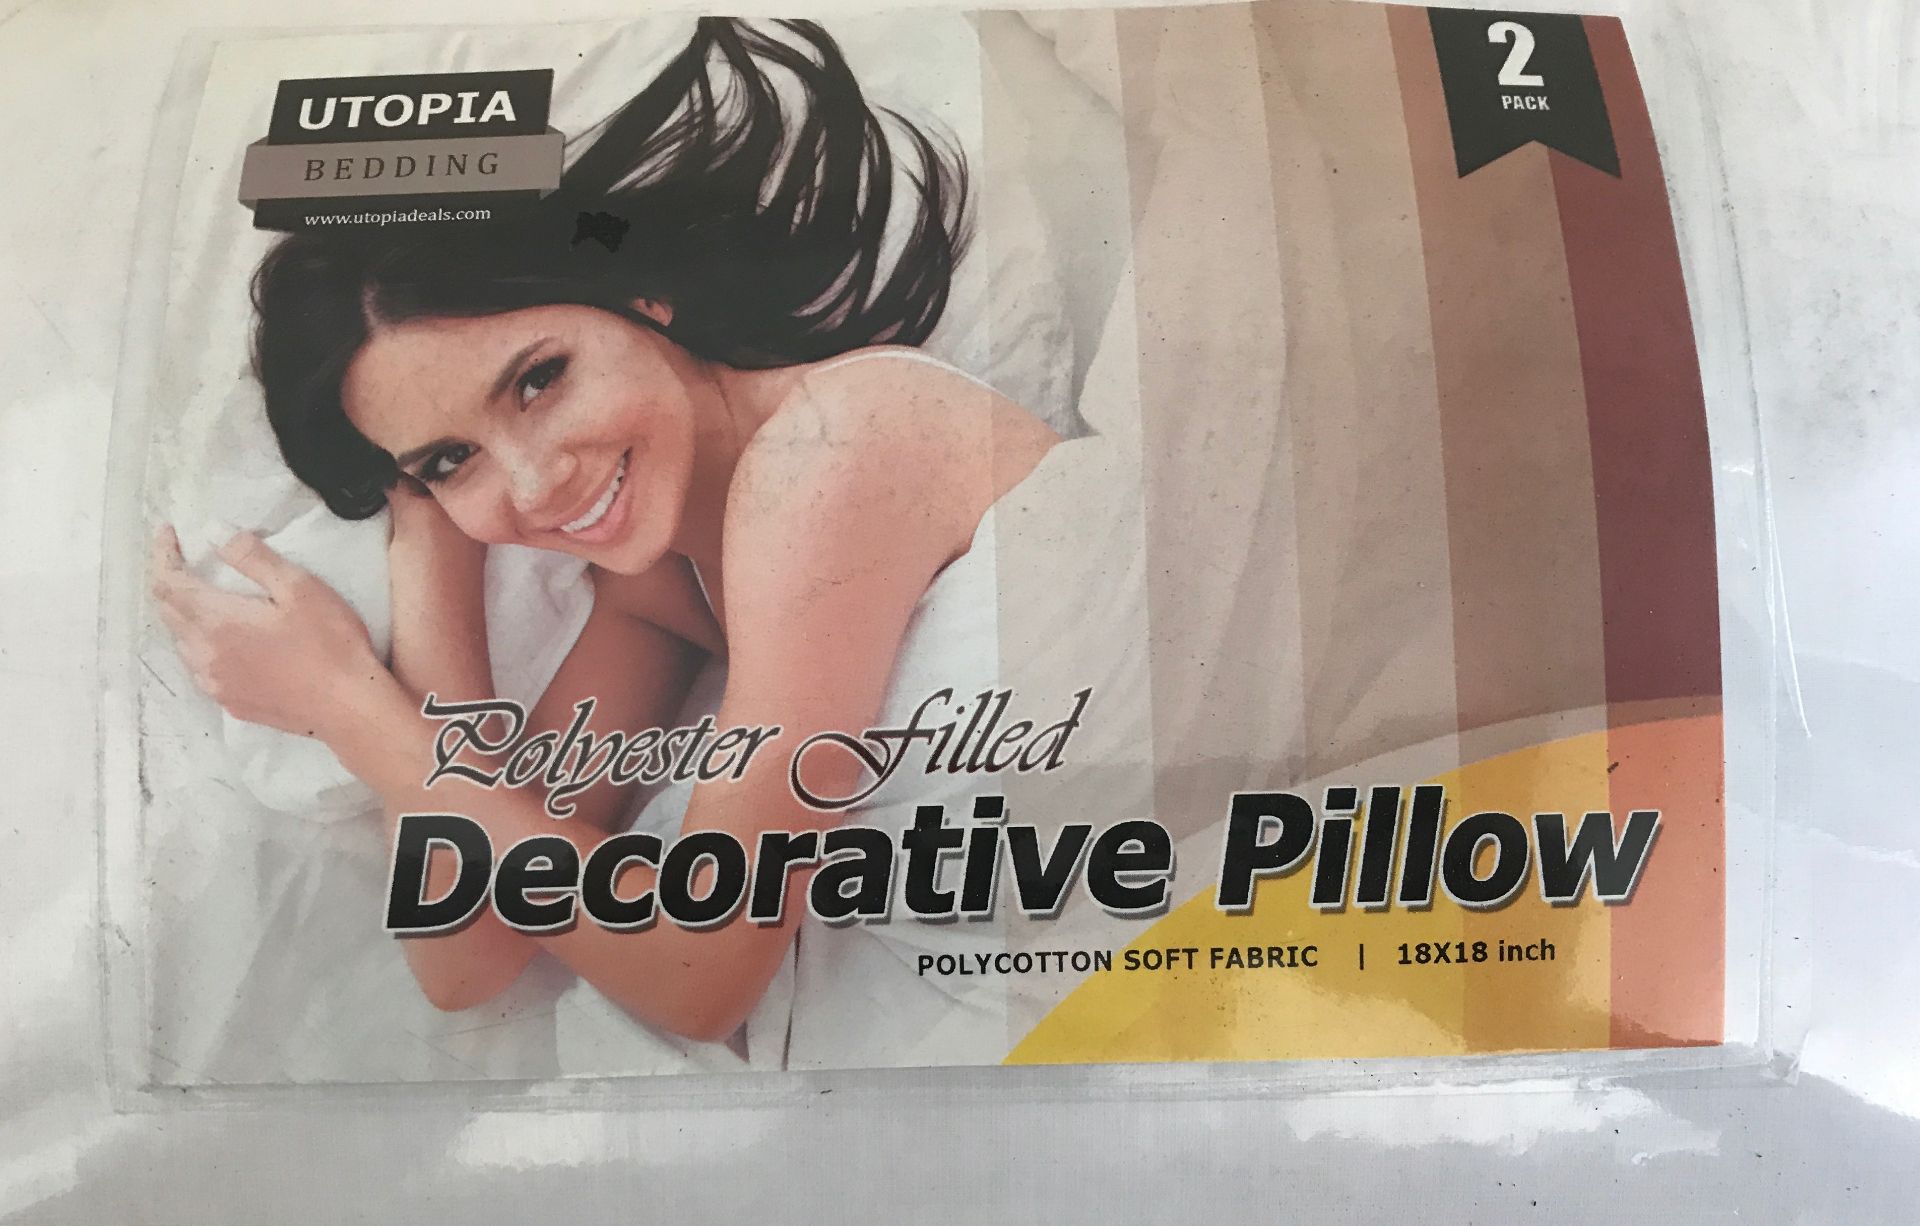 21 LUXURY PILLOW SETS X 2 IN EACH PACK = 42 PILLOWS TOTAL - Image 2 of 2